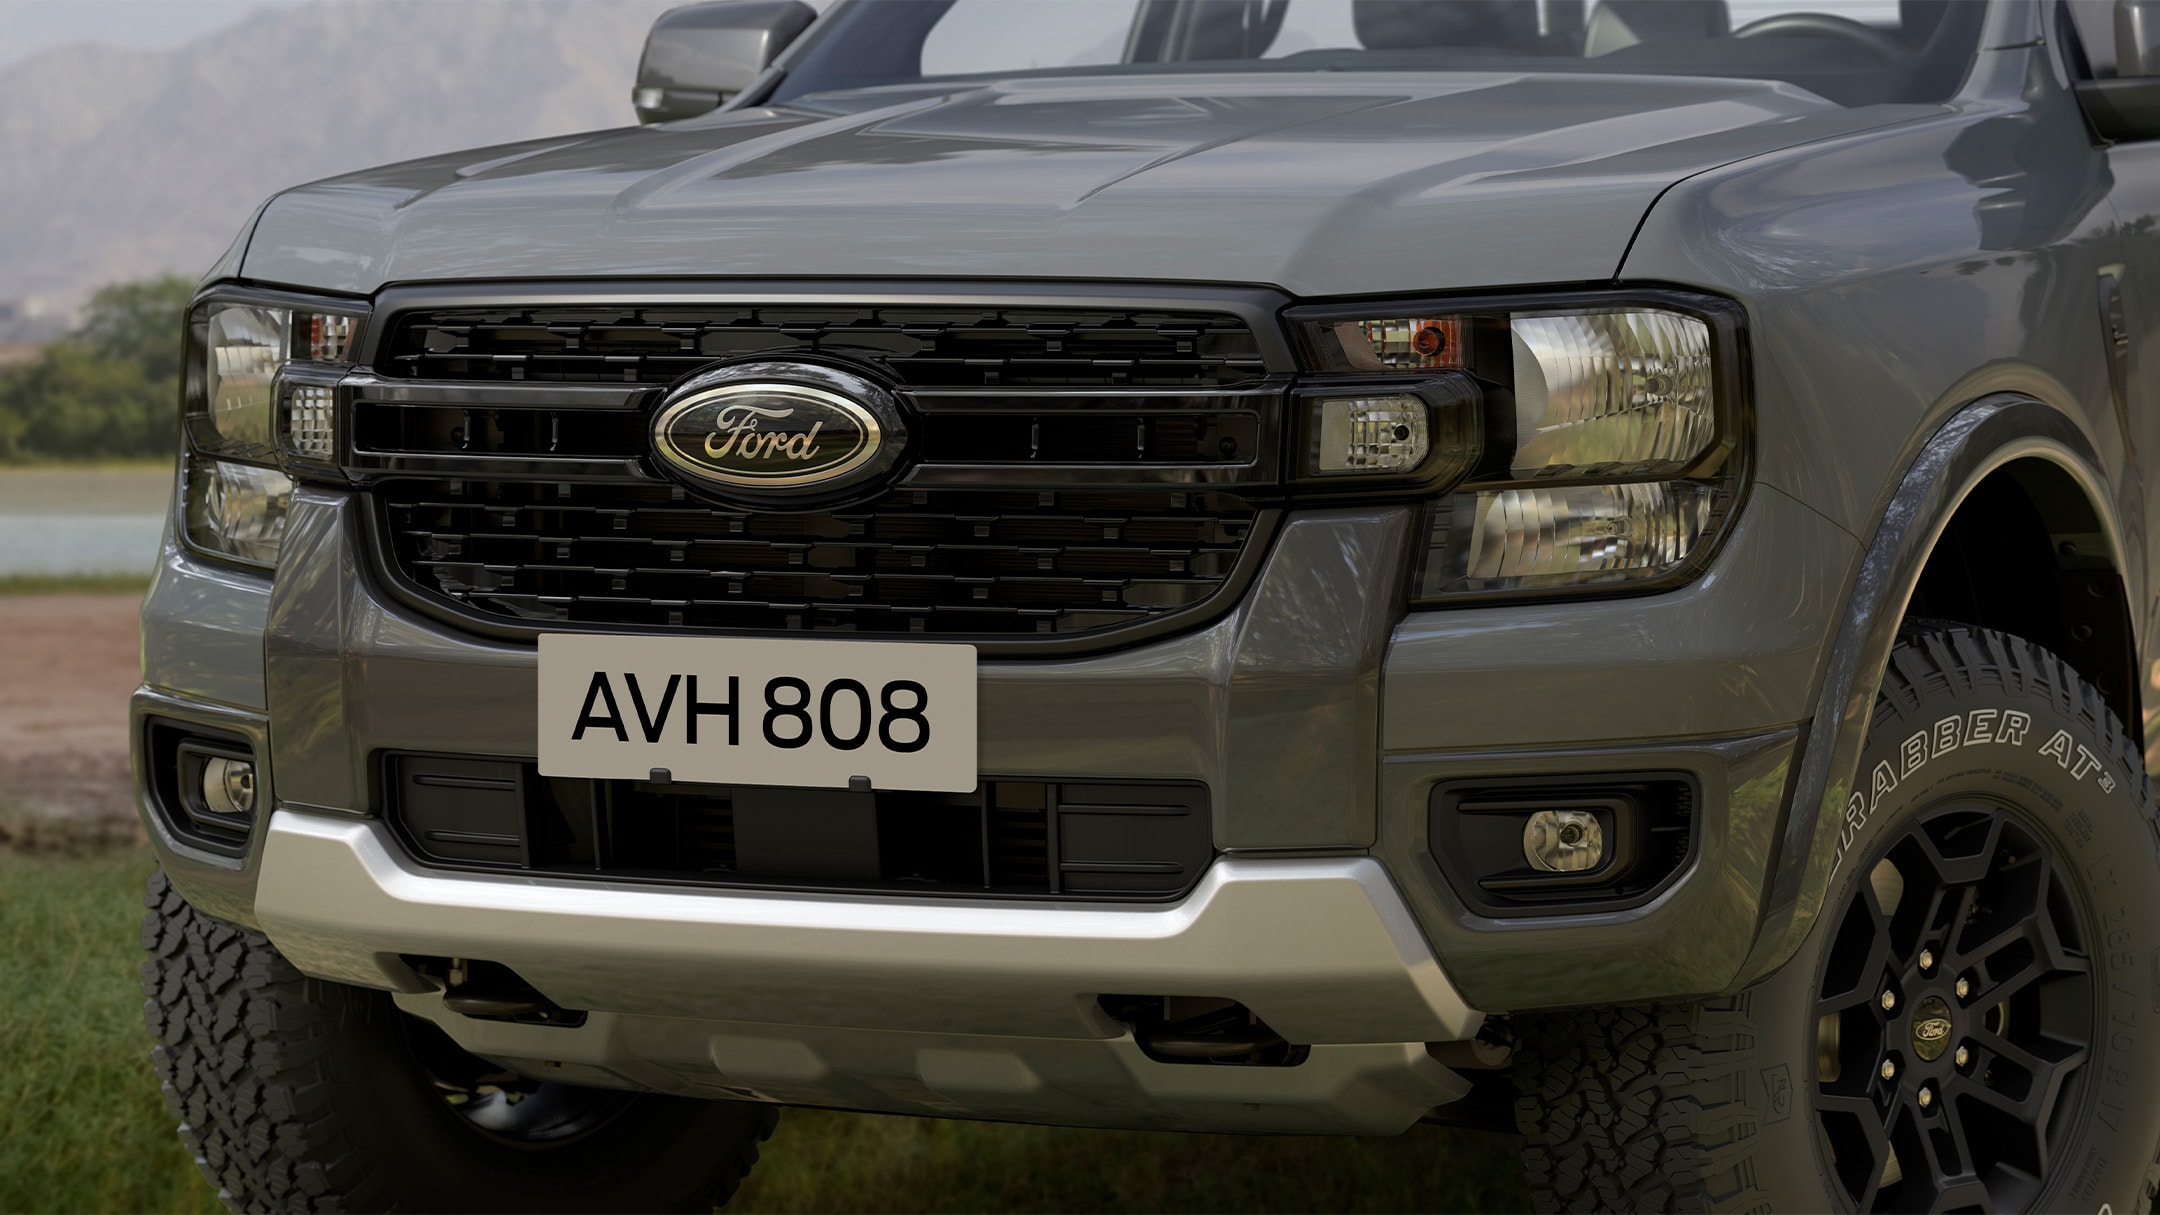 Ford Ranger Tremor front view